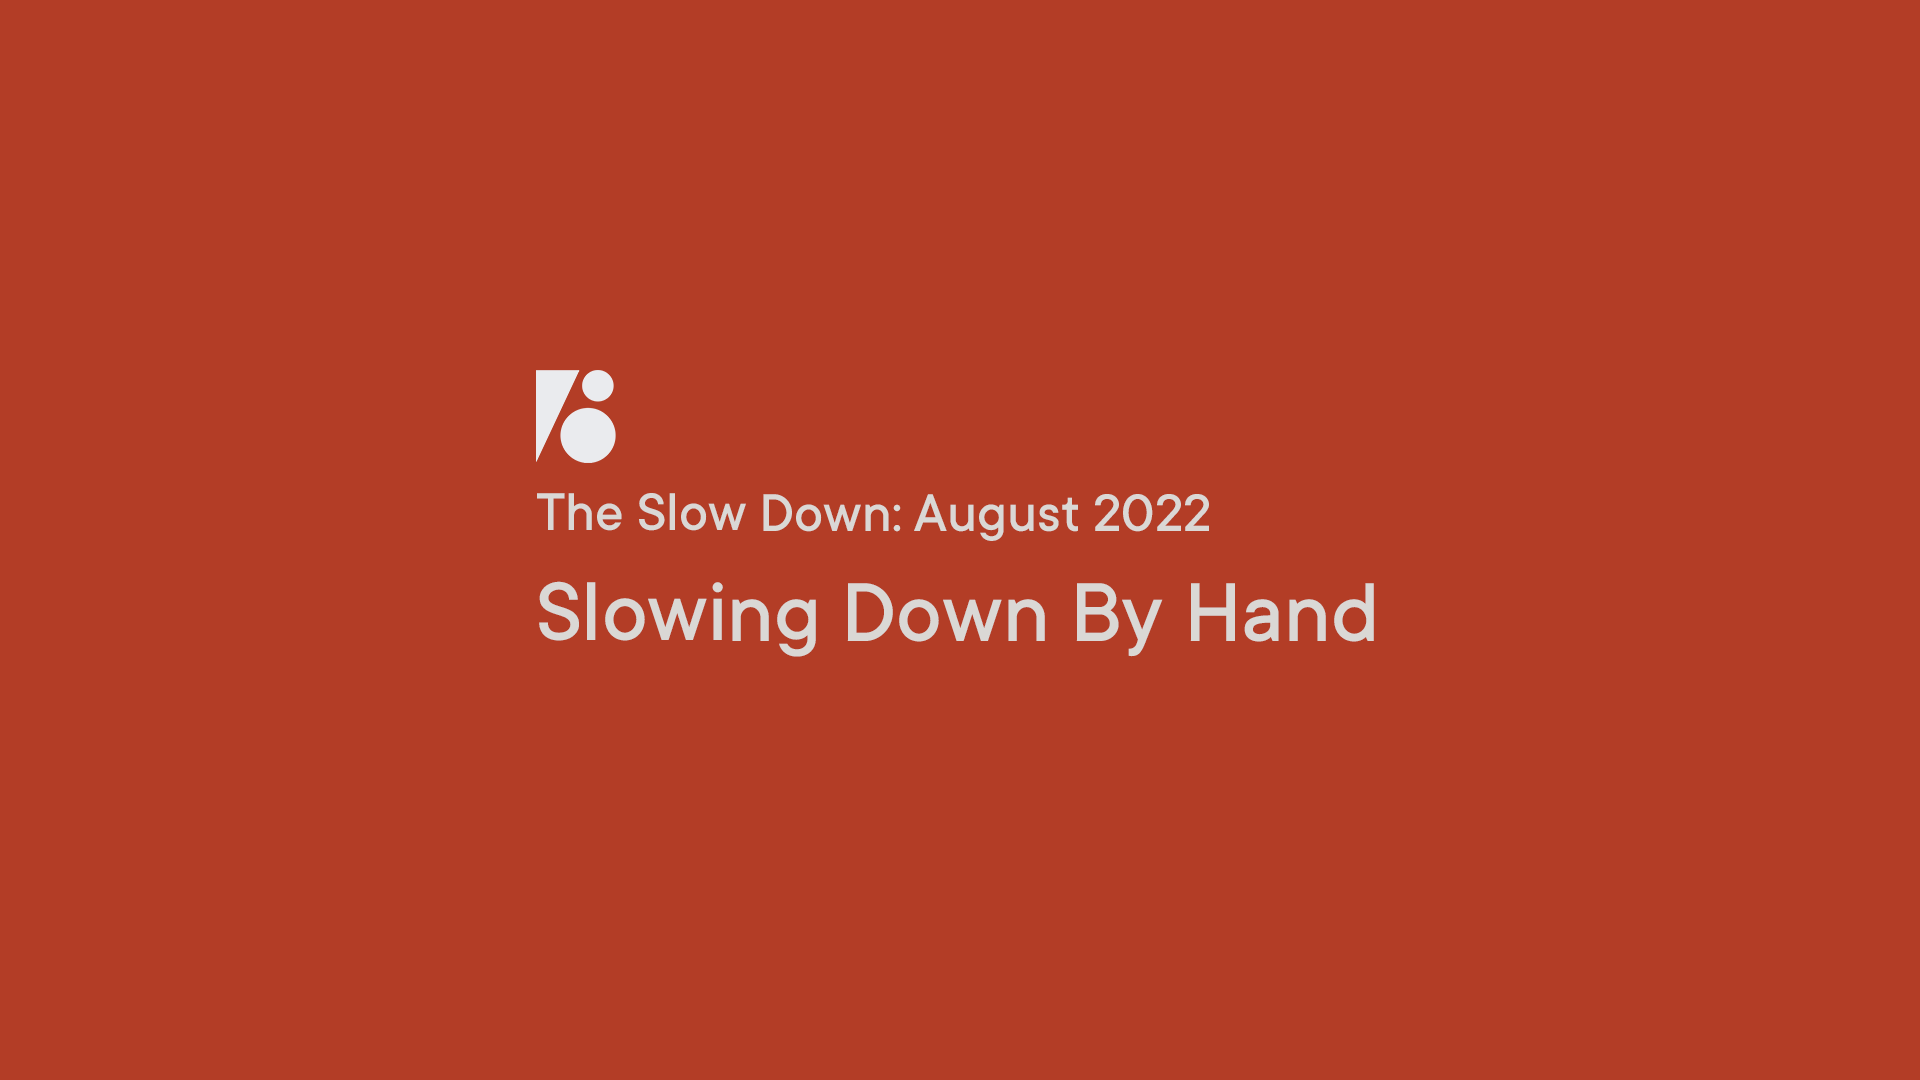 The Slow Down: Slowing Down By Hand